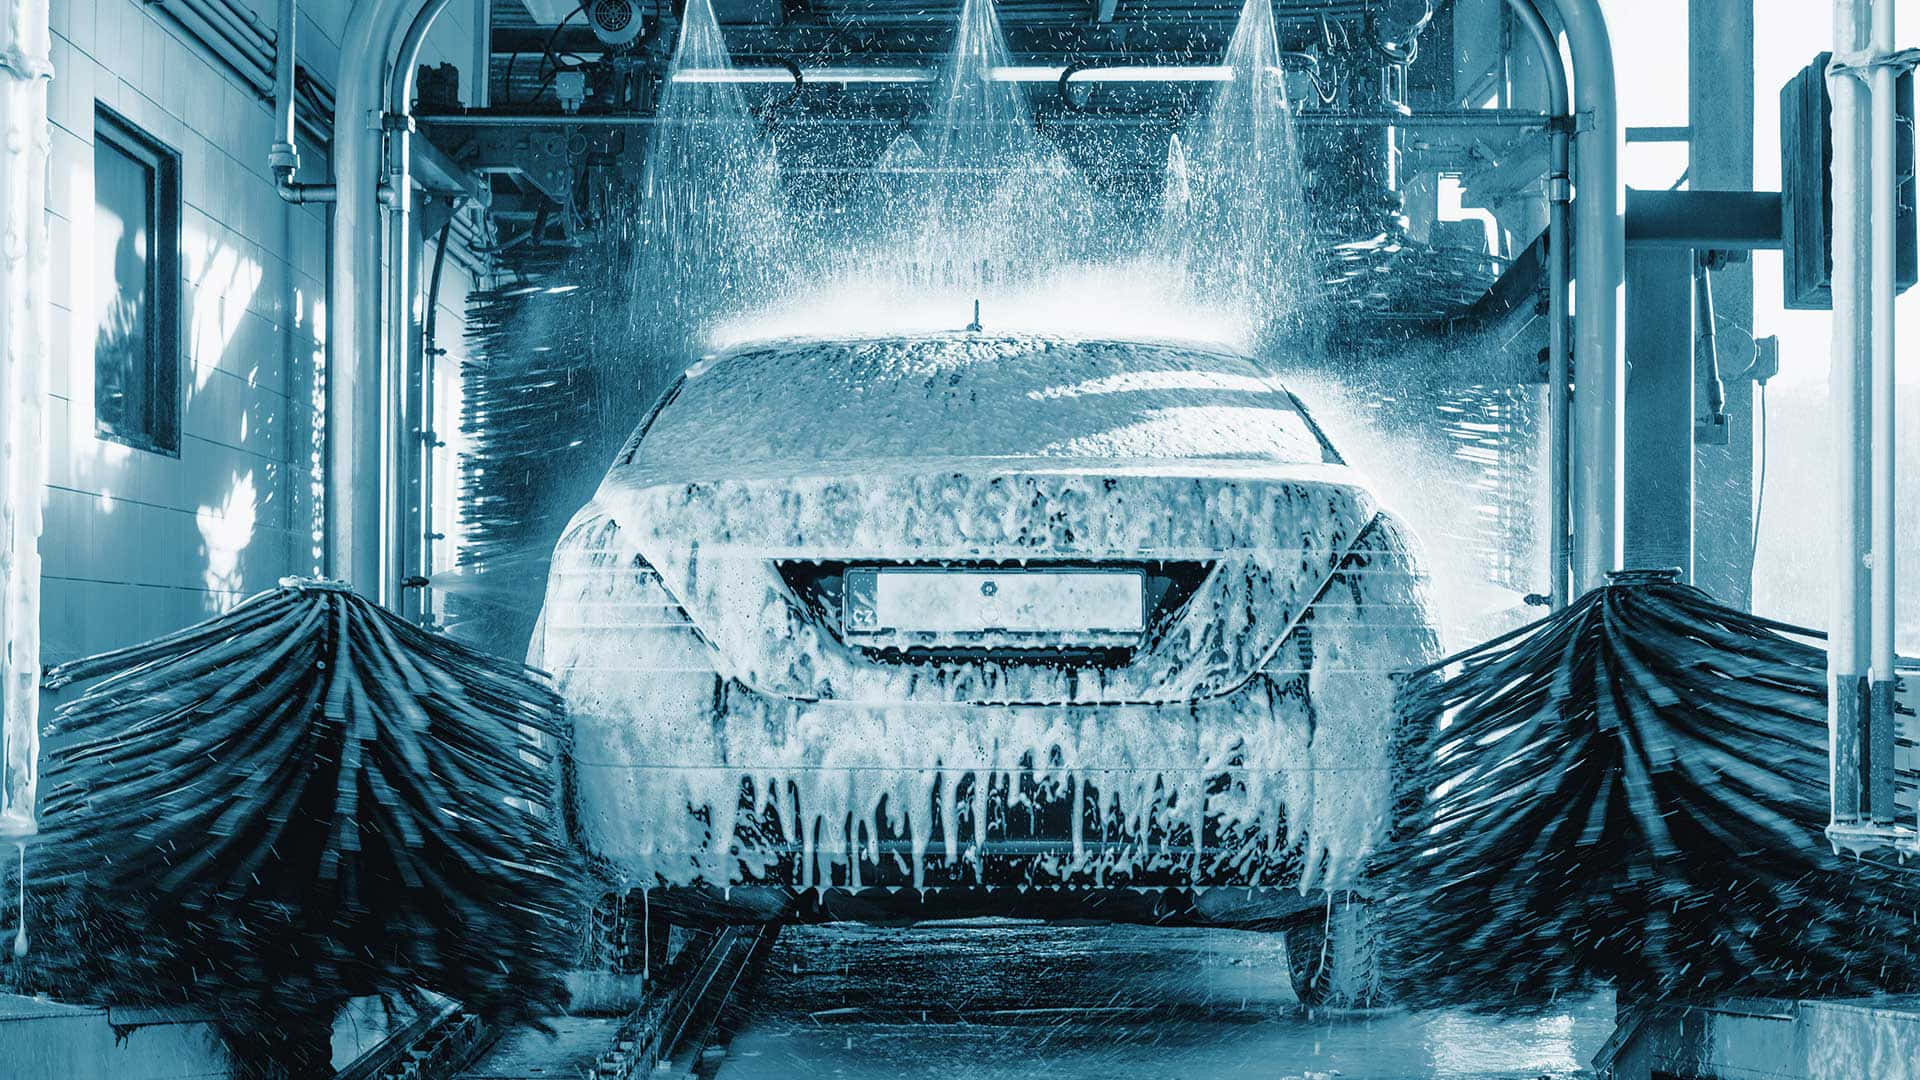 Keep your car clean and streak-free with a professional car wash